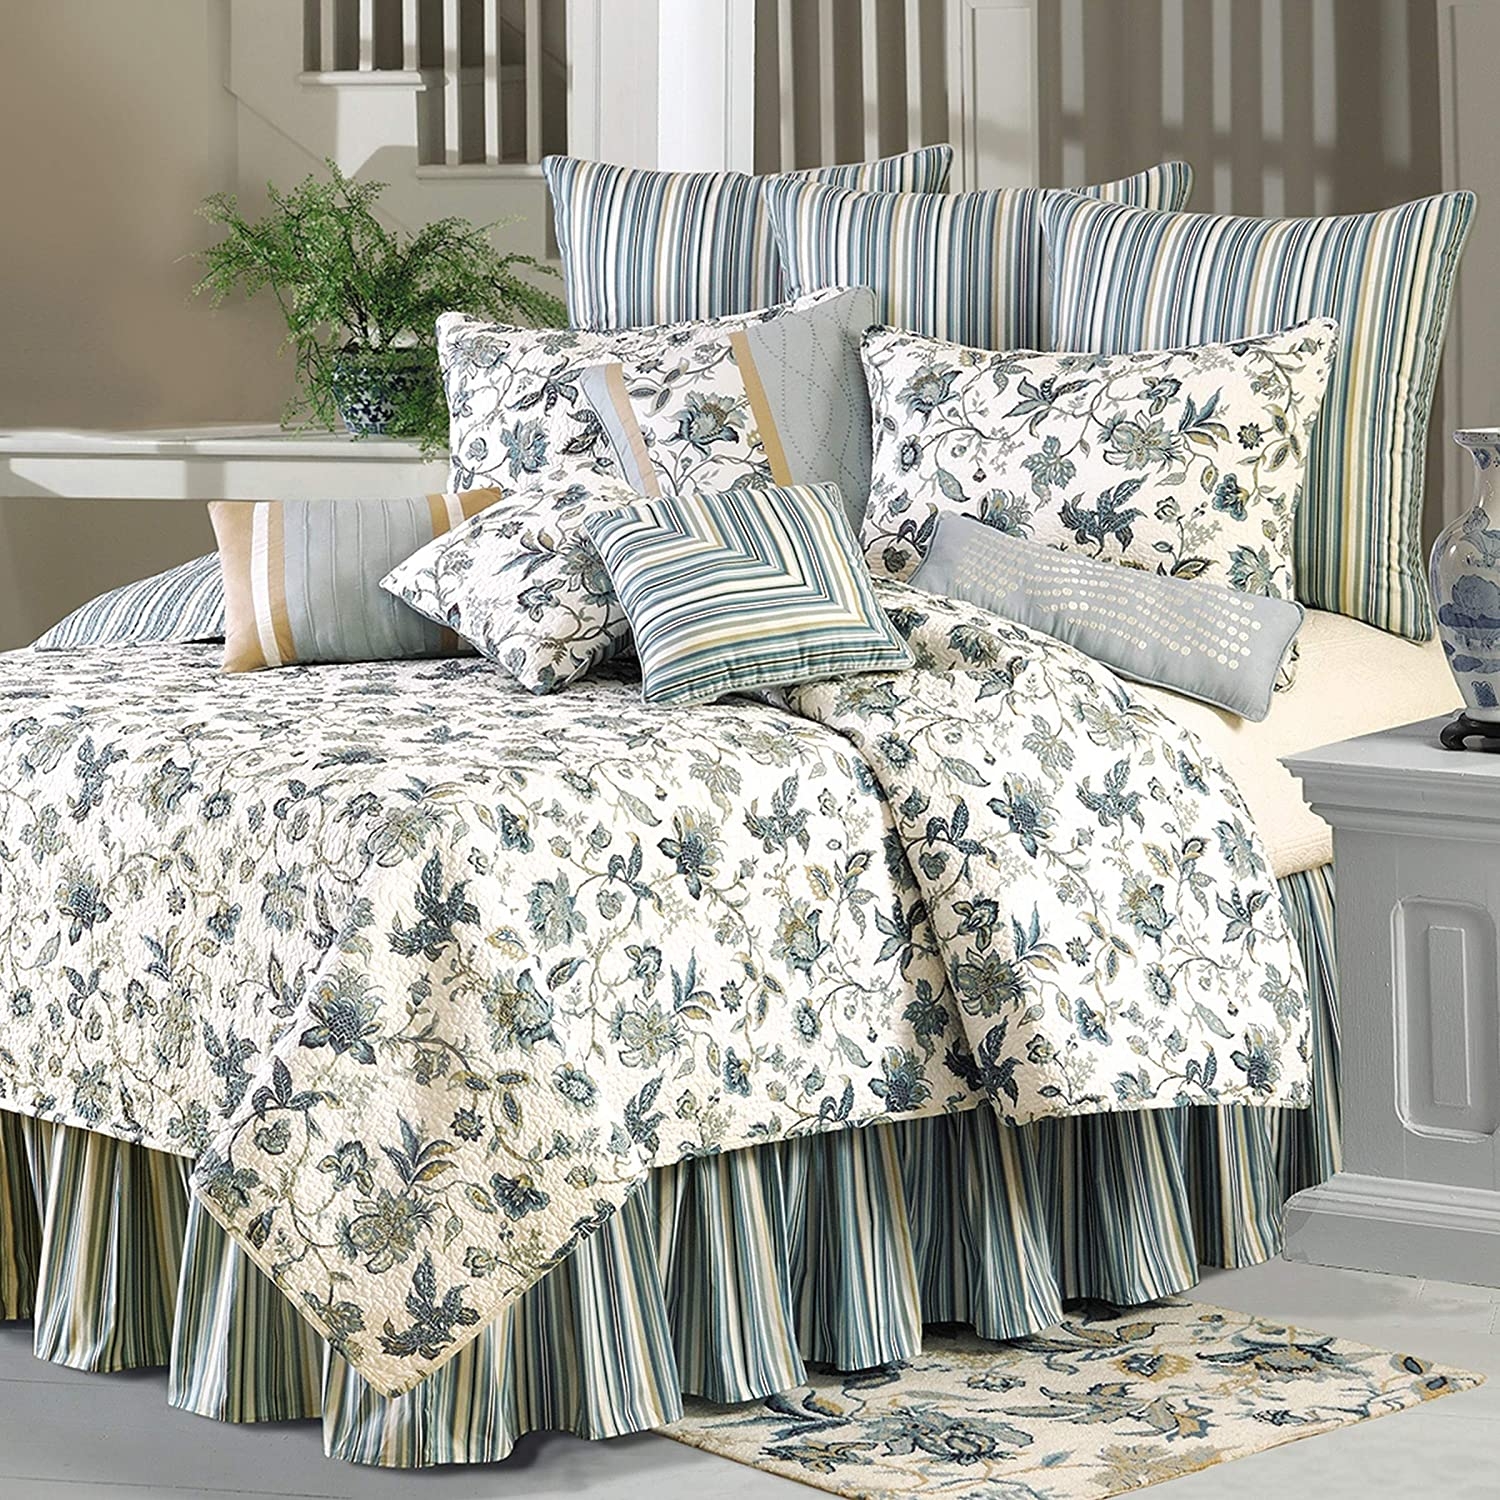 Bedroom blue french country bedding french country bedding sets for